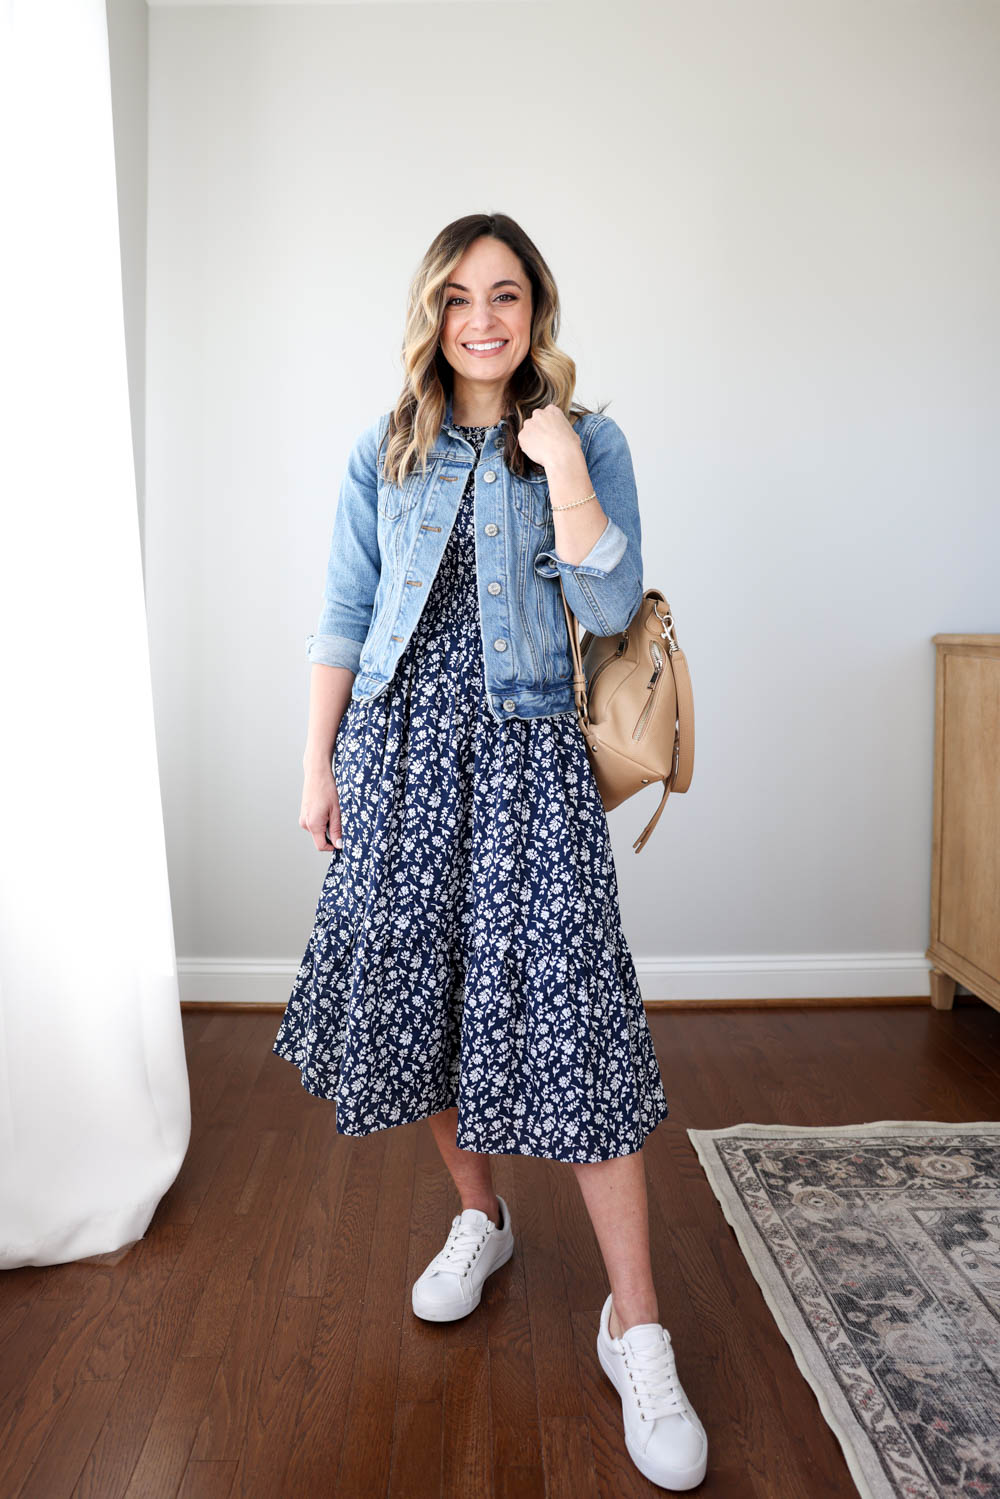 Petite-friendly dresses with sneakers via pumps and push-ups blog | dresses and sneakers outfits | petite style | petite fashion | spring outfits 